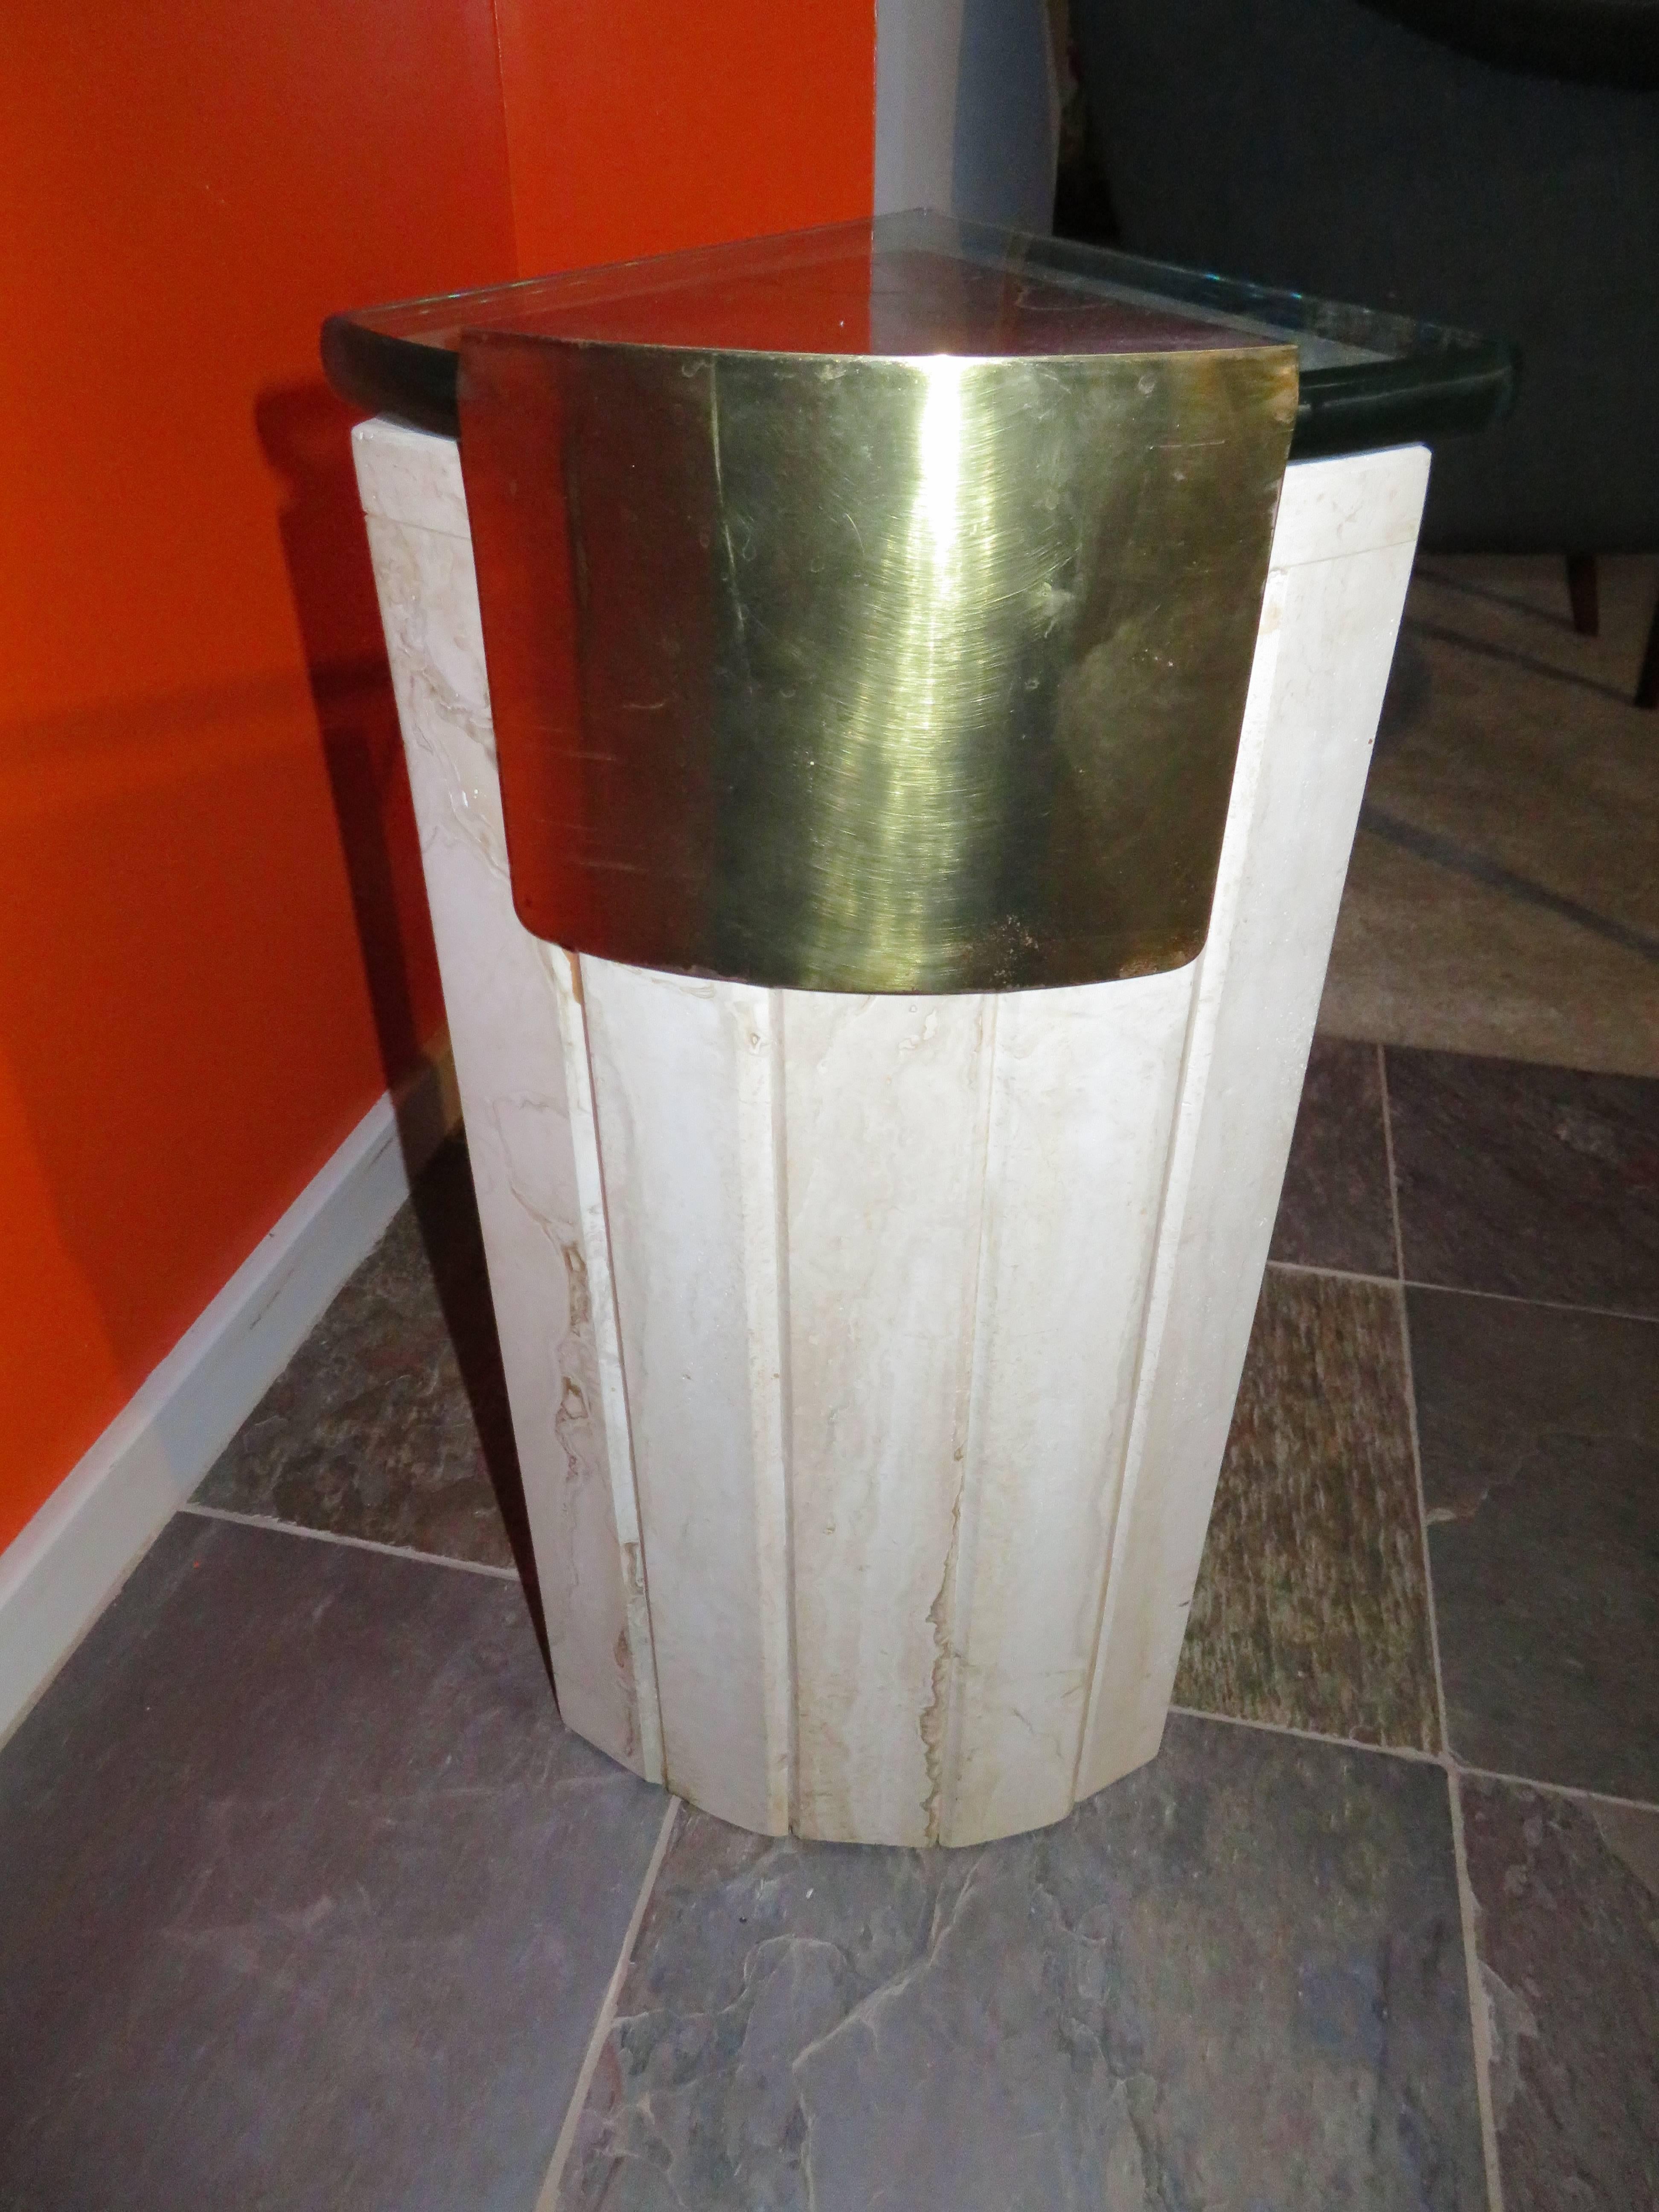 Excellent travertine, brass and glass wedge shaped side table. This wonderful side table is made of super heavy travertine marble with solid brass details and a triangular 3/4